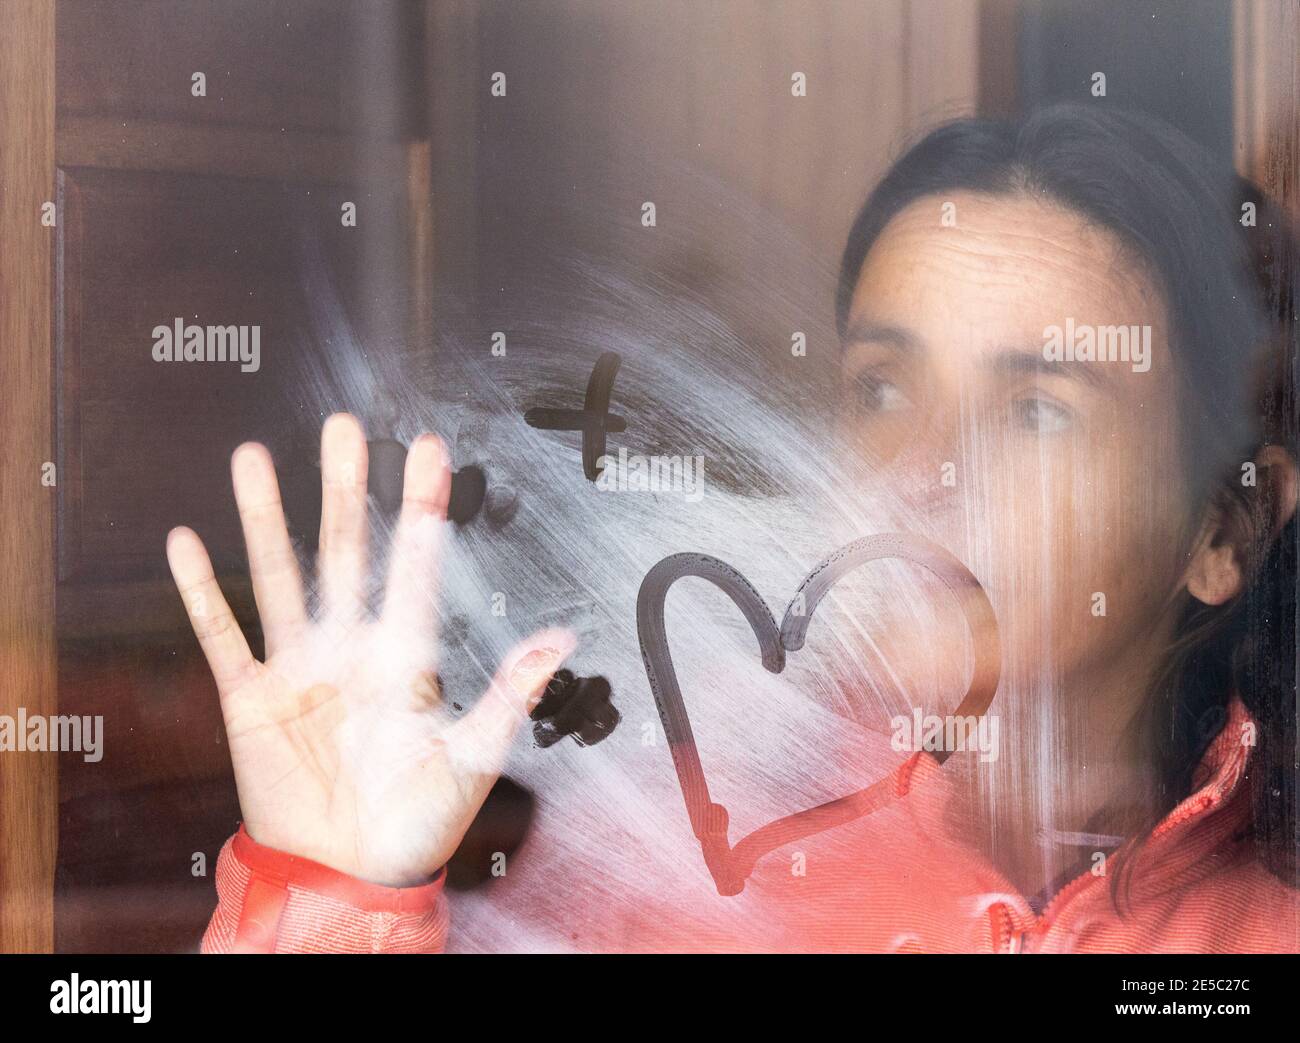 Middle aged woman looking out of window. Condensation on window. Stock Photo